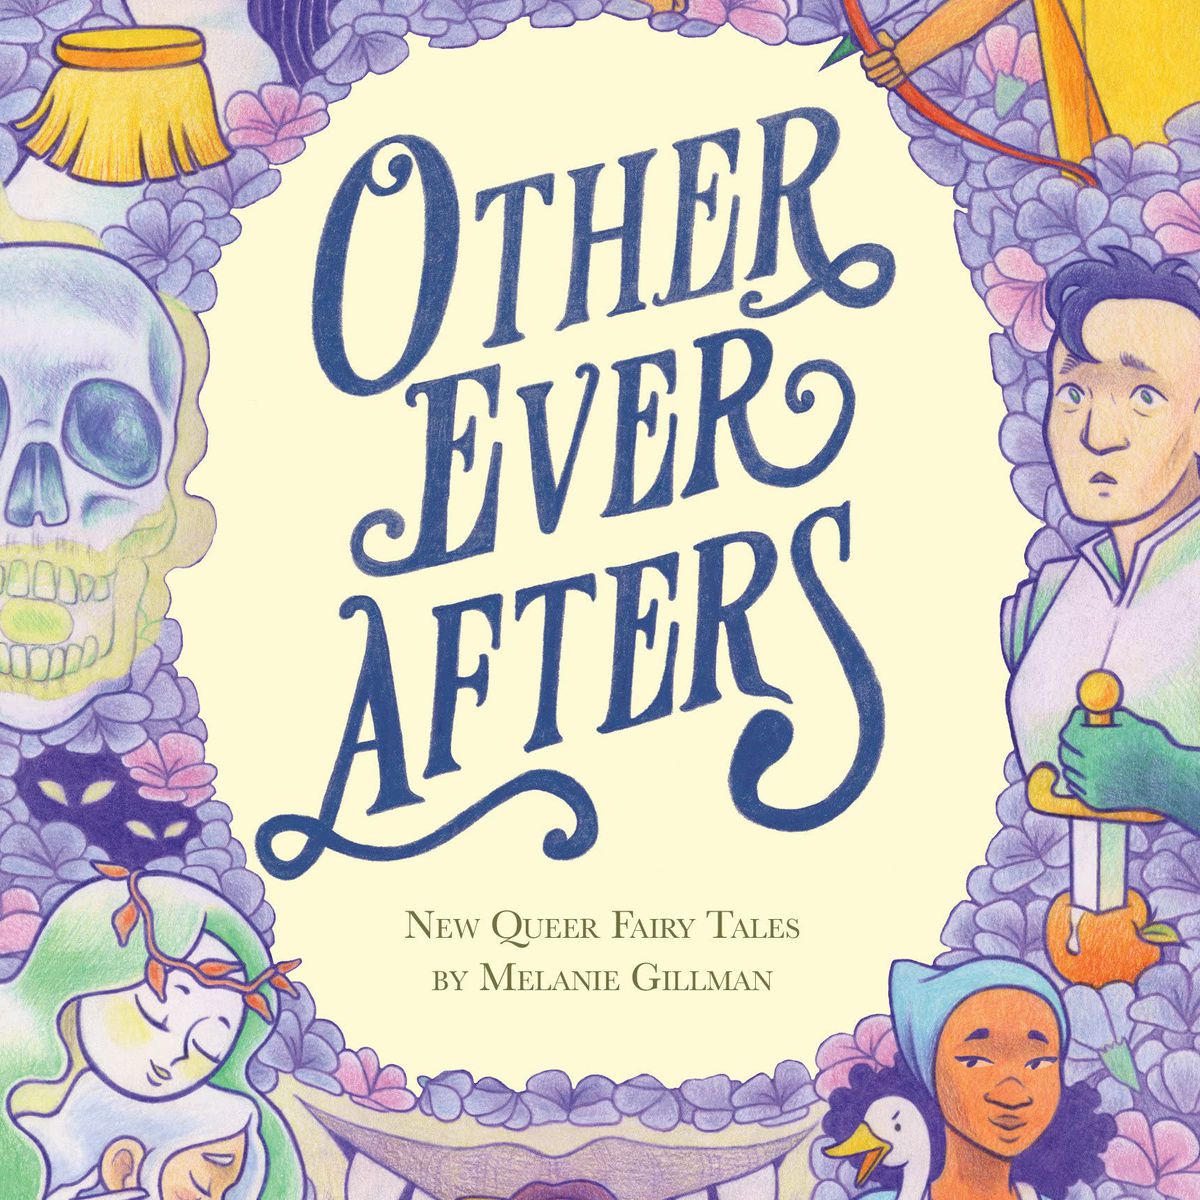 The book cover for Melanie Gillman’s Other Ever Afters, with a series of fairy-tale characters in a montage around the title